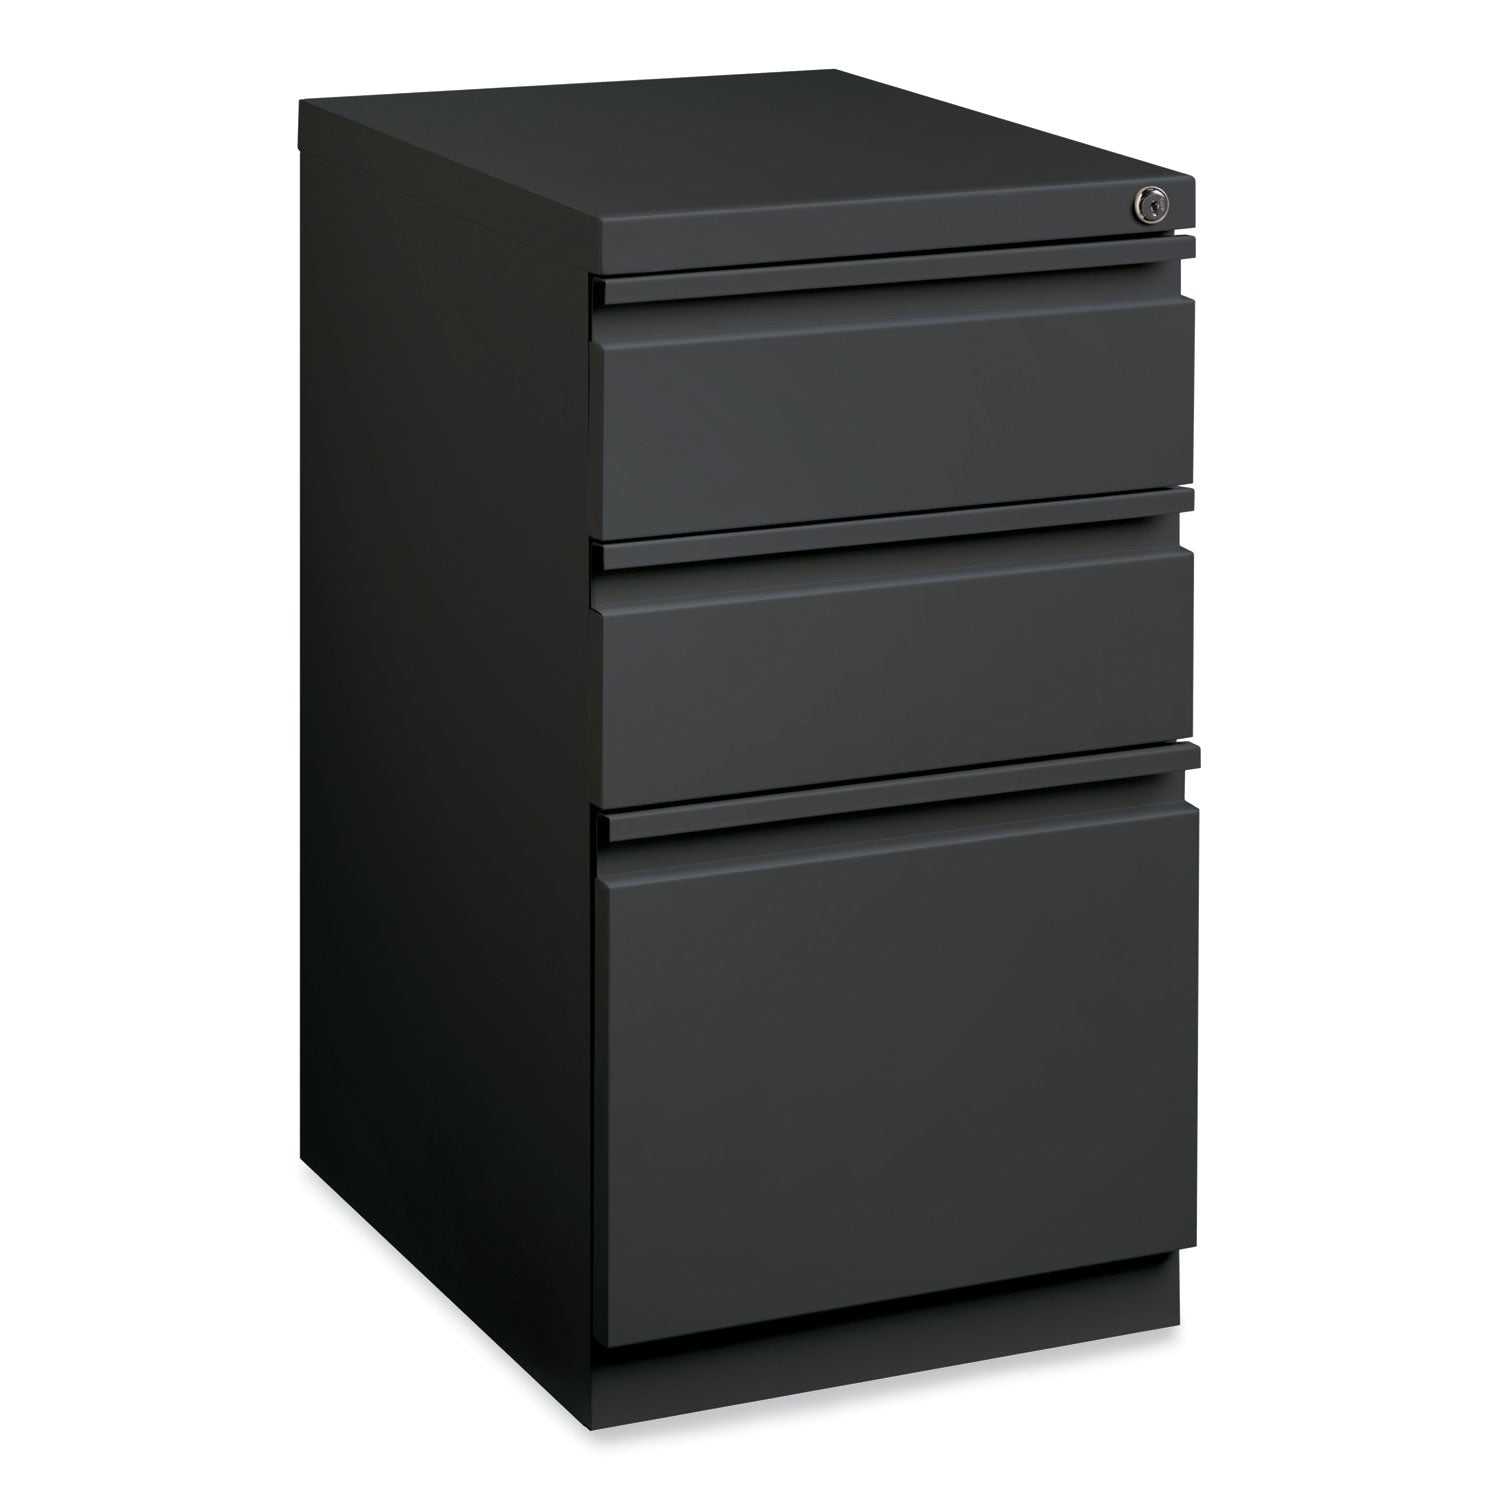 full-width-pull-20-deep-mobile-pedestal-file-box-box-file-letter-charcoal-15-x-1988-x-2775-ships-in-4-6-business-days_hid19322 - 1